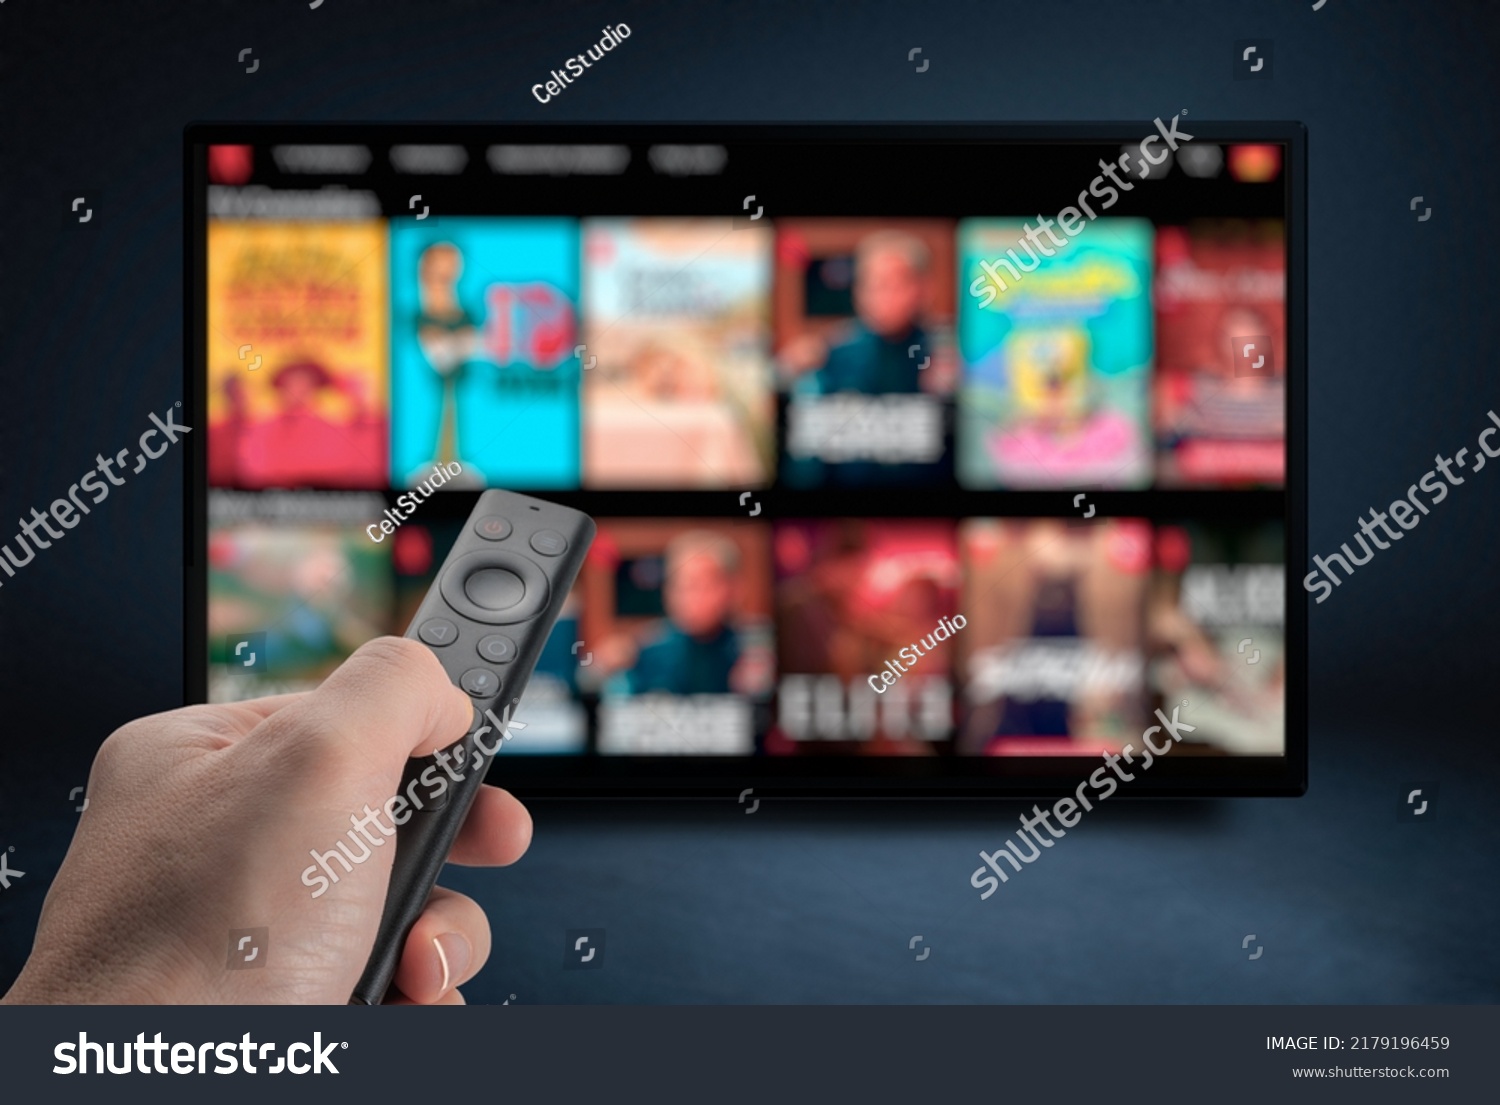 Tv online. Television streaming video. Media TV on demand. Online Multimedia video concept on TV set in dark room. Watching online TV with remote control in hand. #2179196459